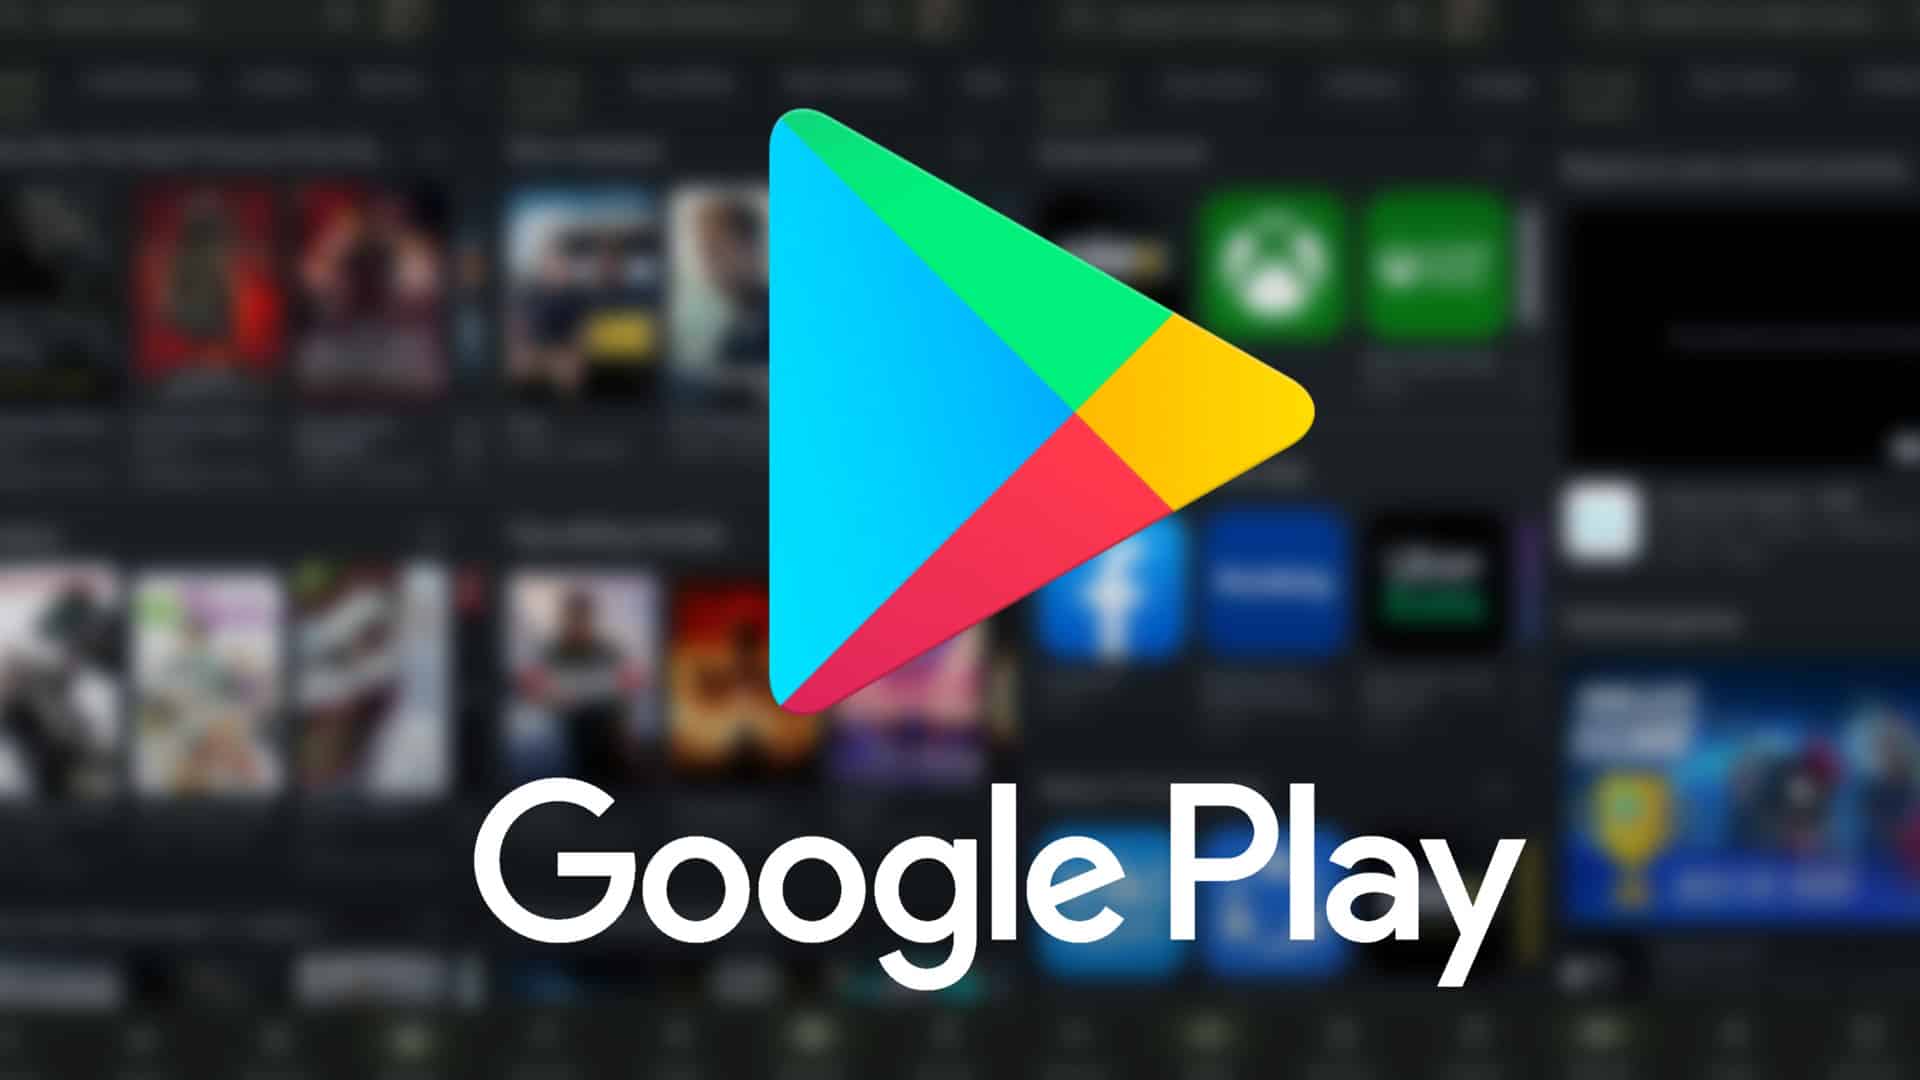 Indian apps, games record 200 pc increase in active monthly users: Google Play